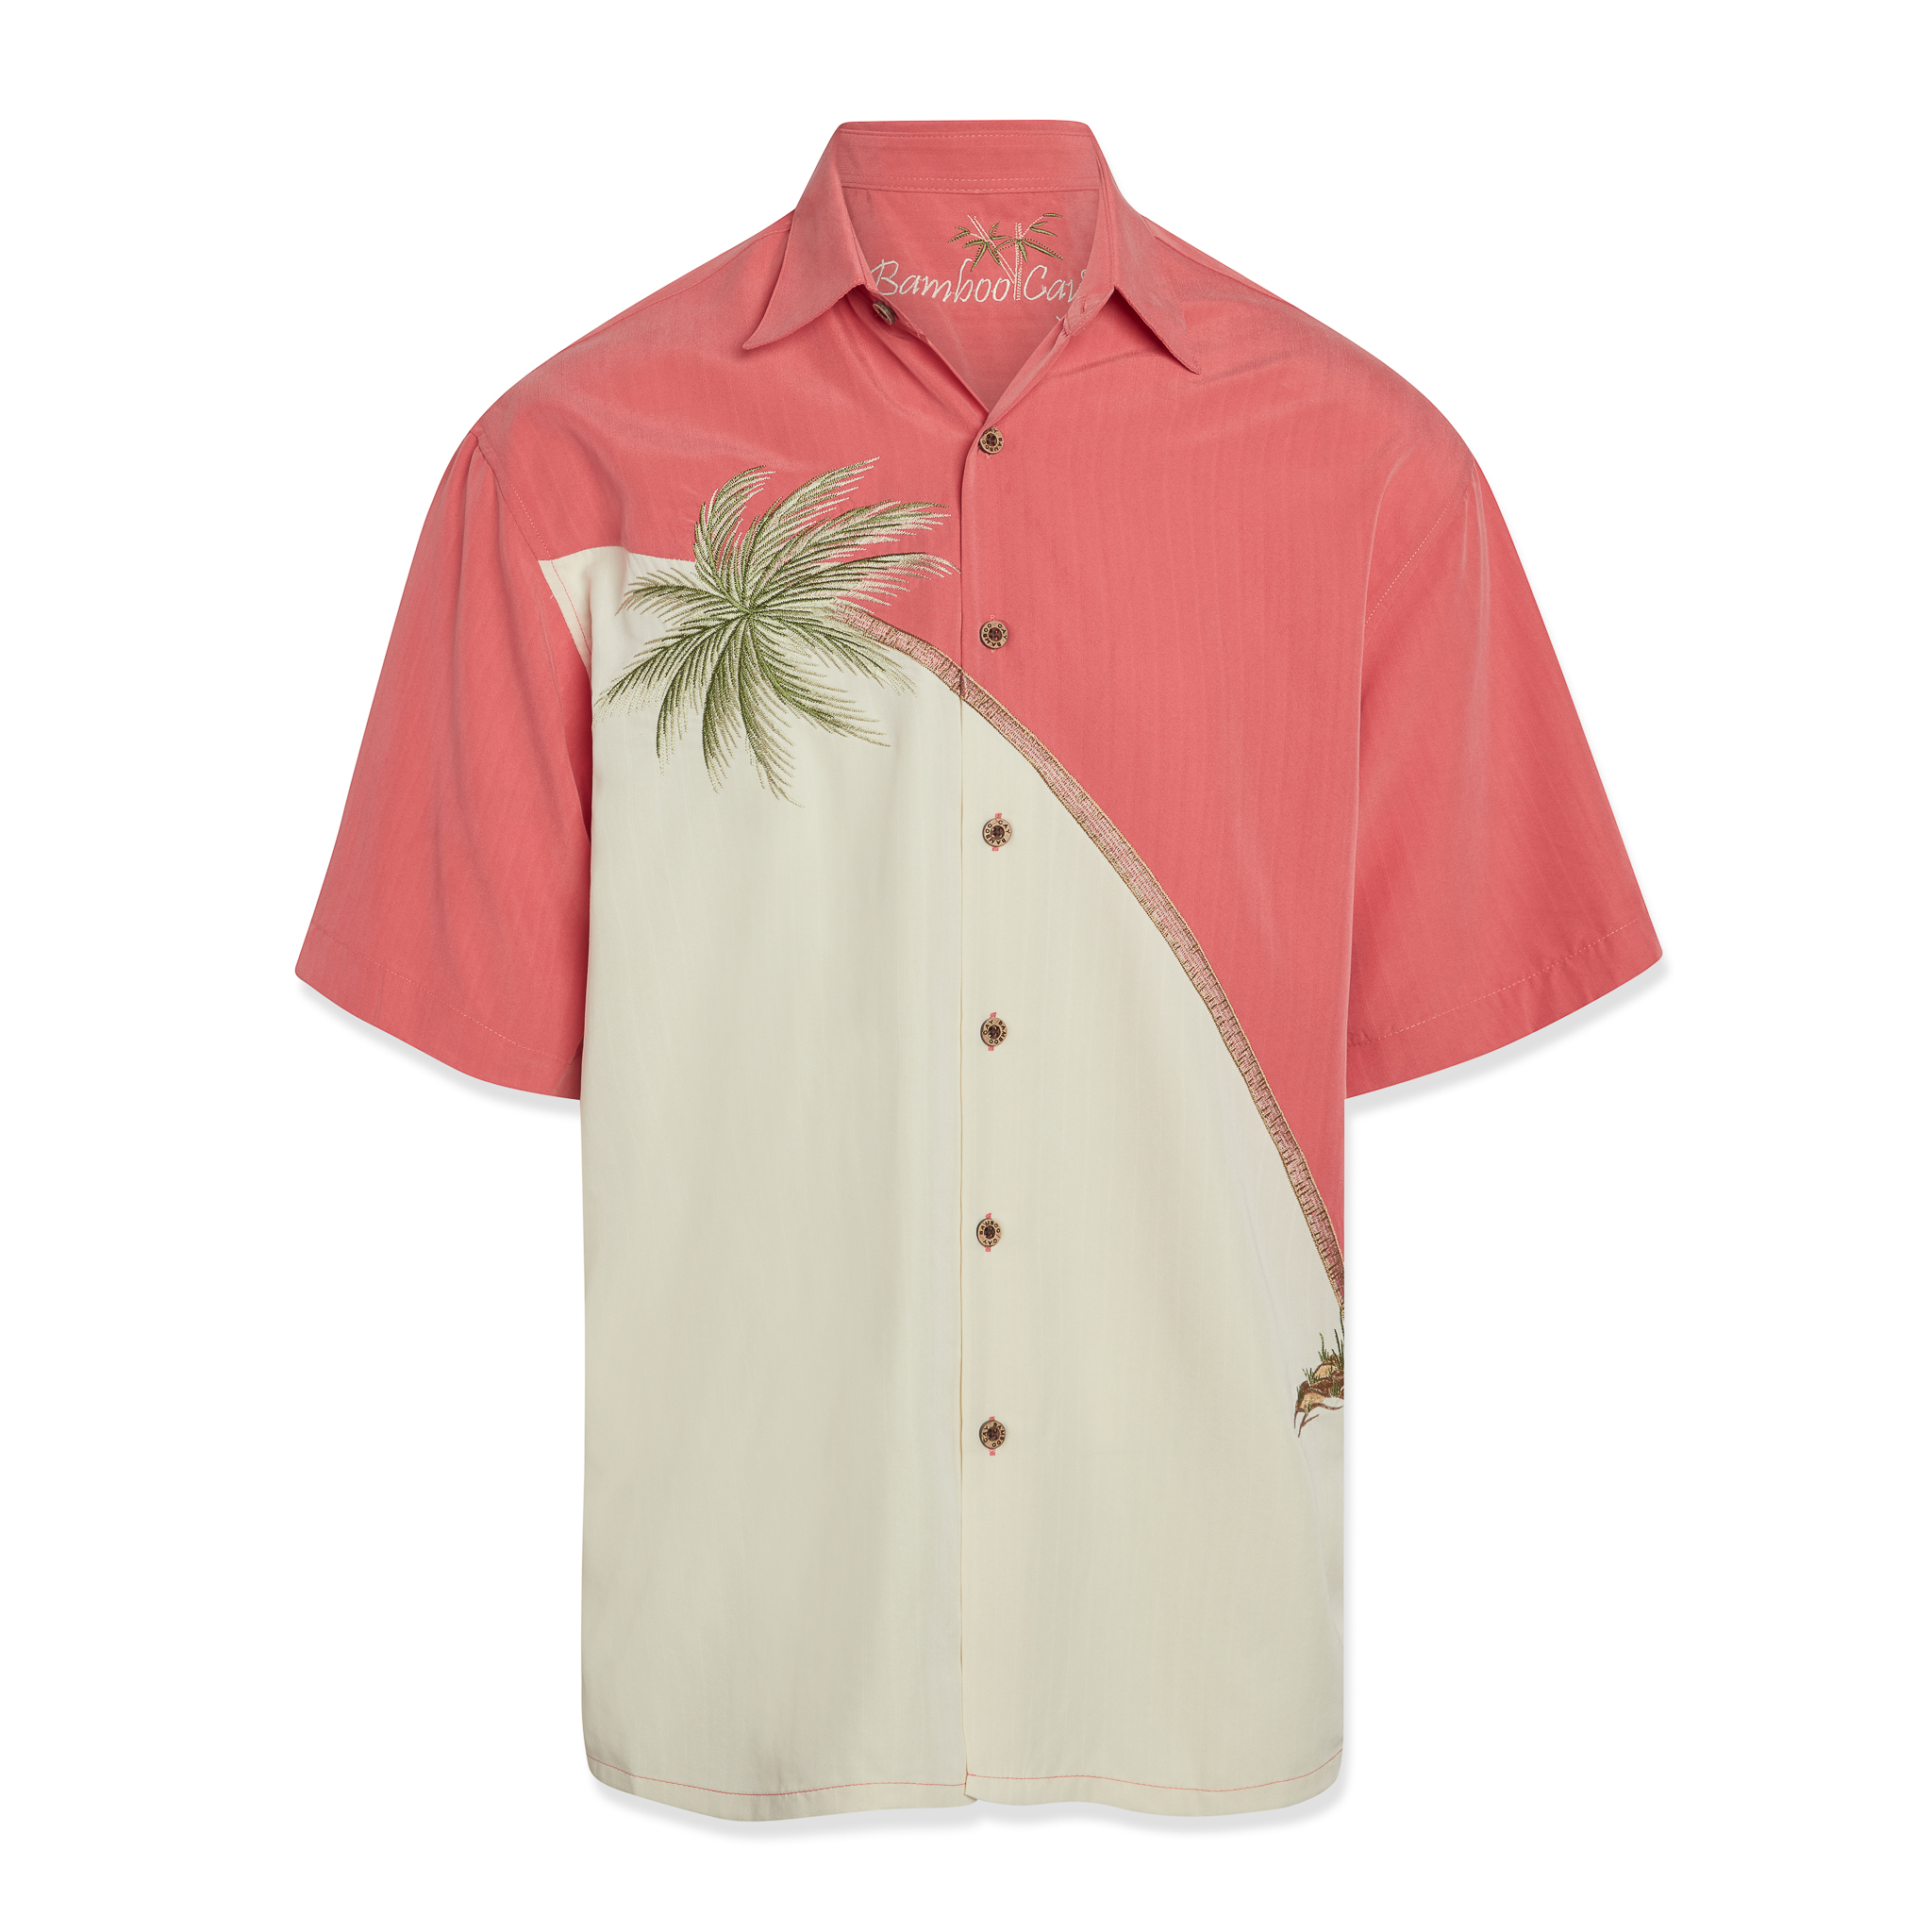 bamboo cay mens hurricane palm embroidered shirt